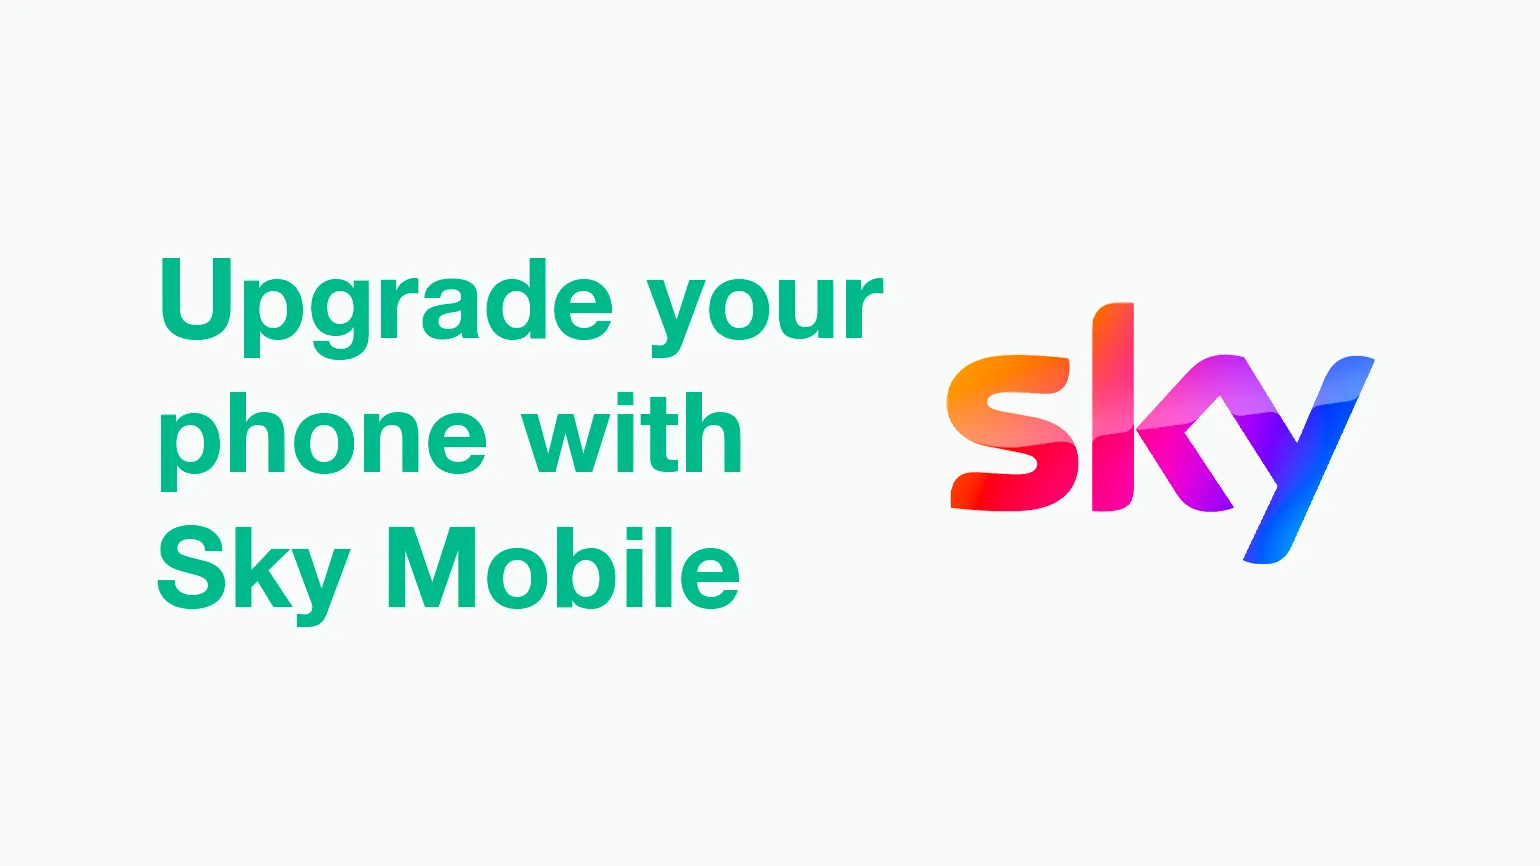 Upgrading your phone on Sky Mobile